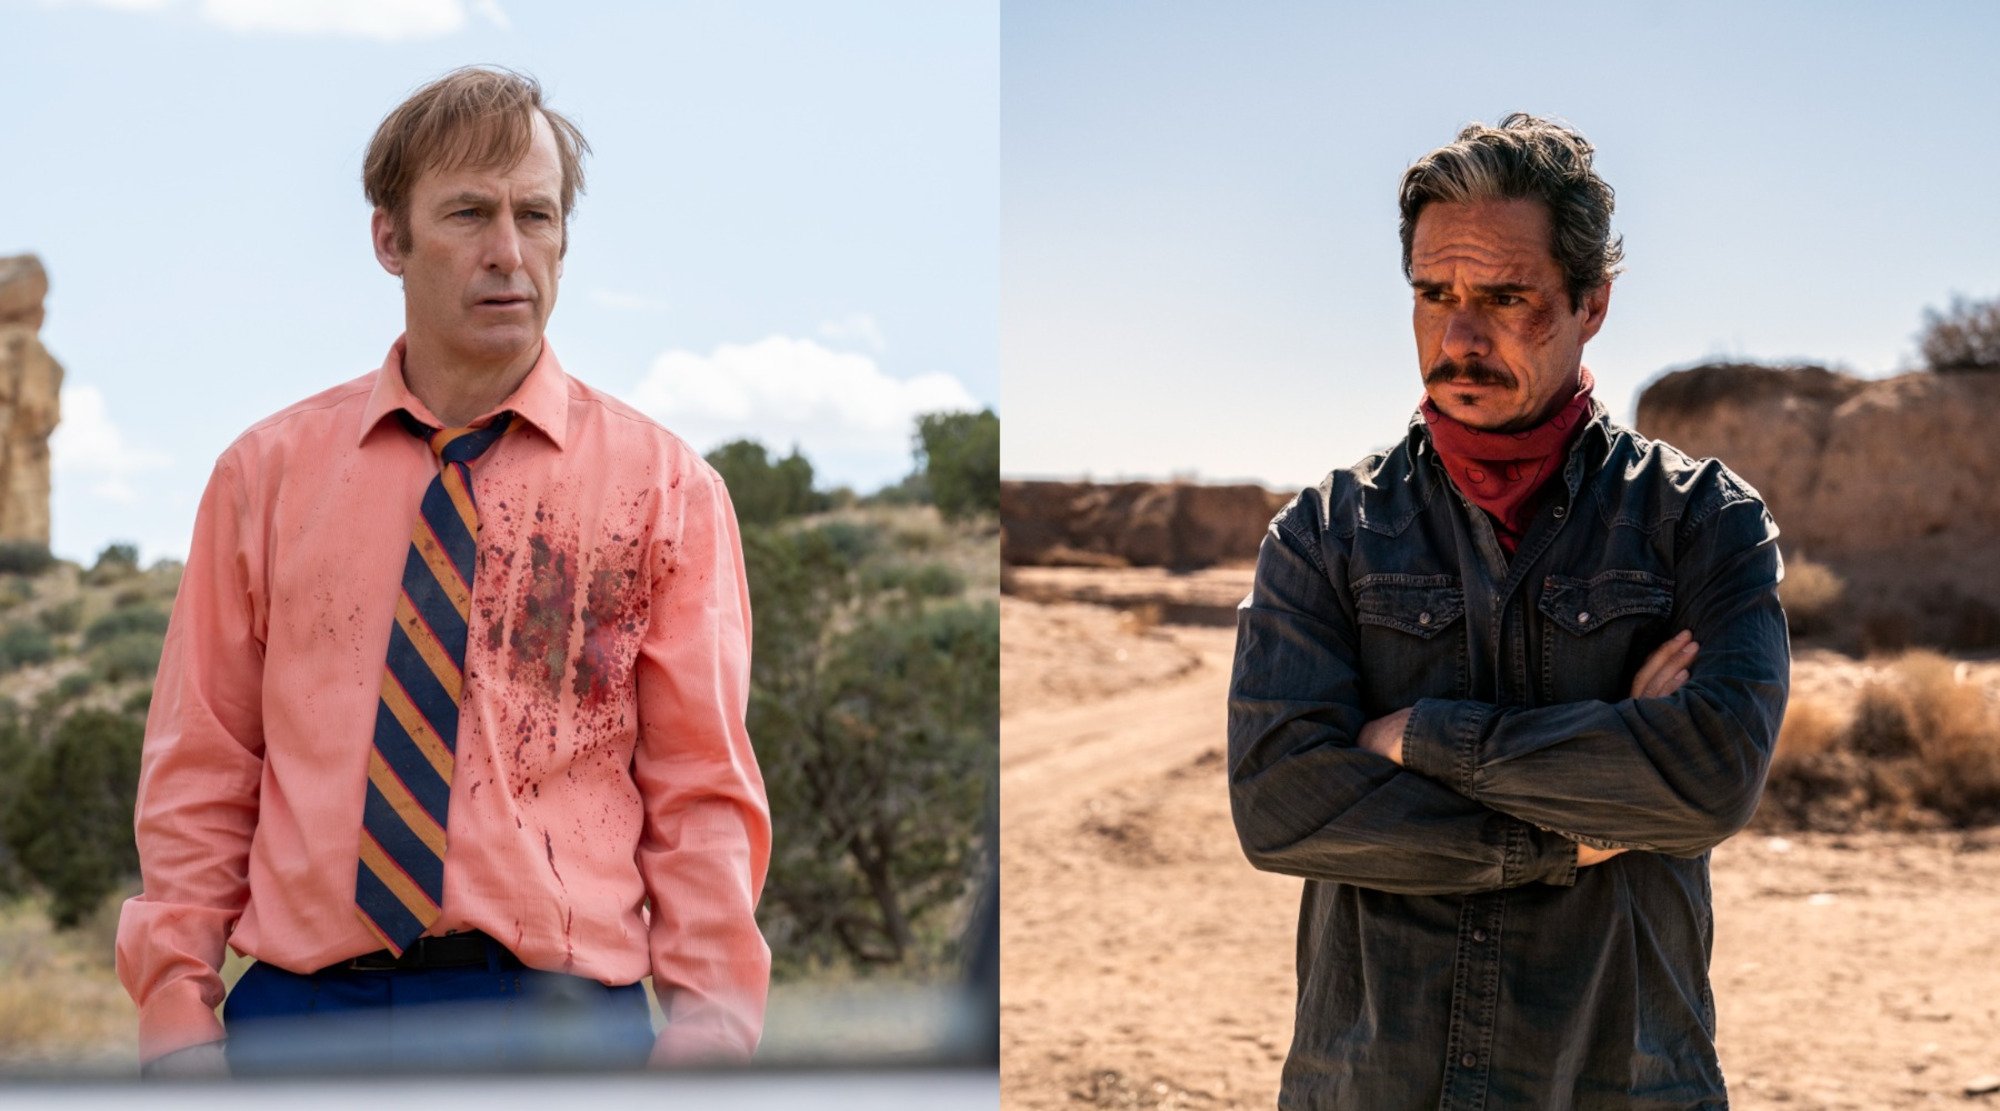 Bob Odenkirk as Jimmy McGill and Tony Dalton as Lalo Salamanca in 'Better Call Saul' Season 5. The picture of jimmy (left) sees his wearing a bloody pink shirt. The photo on the right (of Lalo) shows him standing in the desert with his arms crossed and his face bruised.